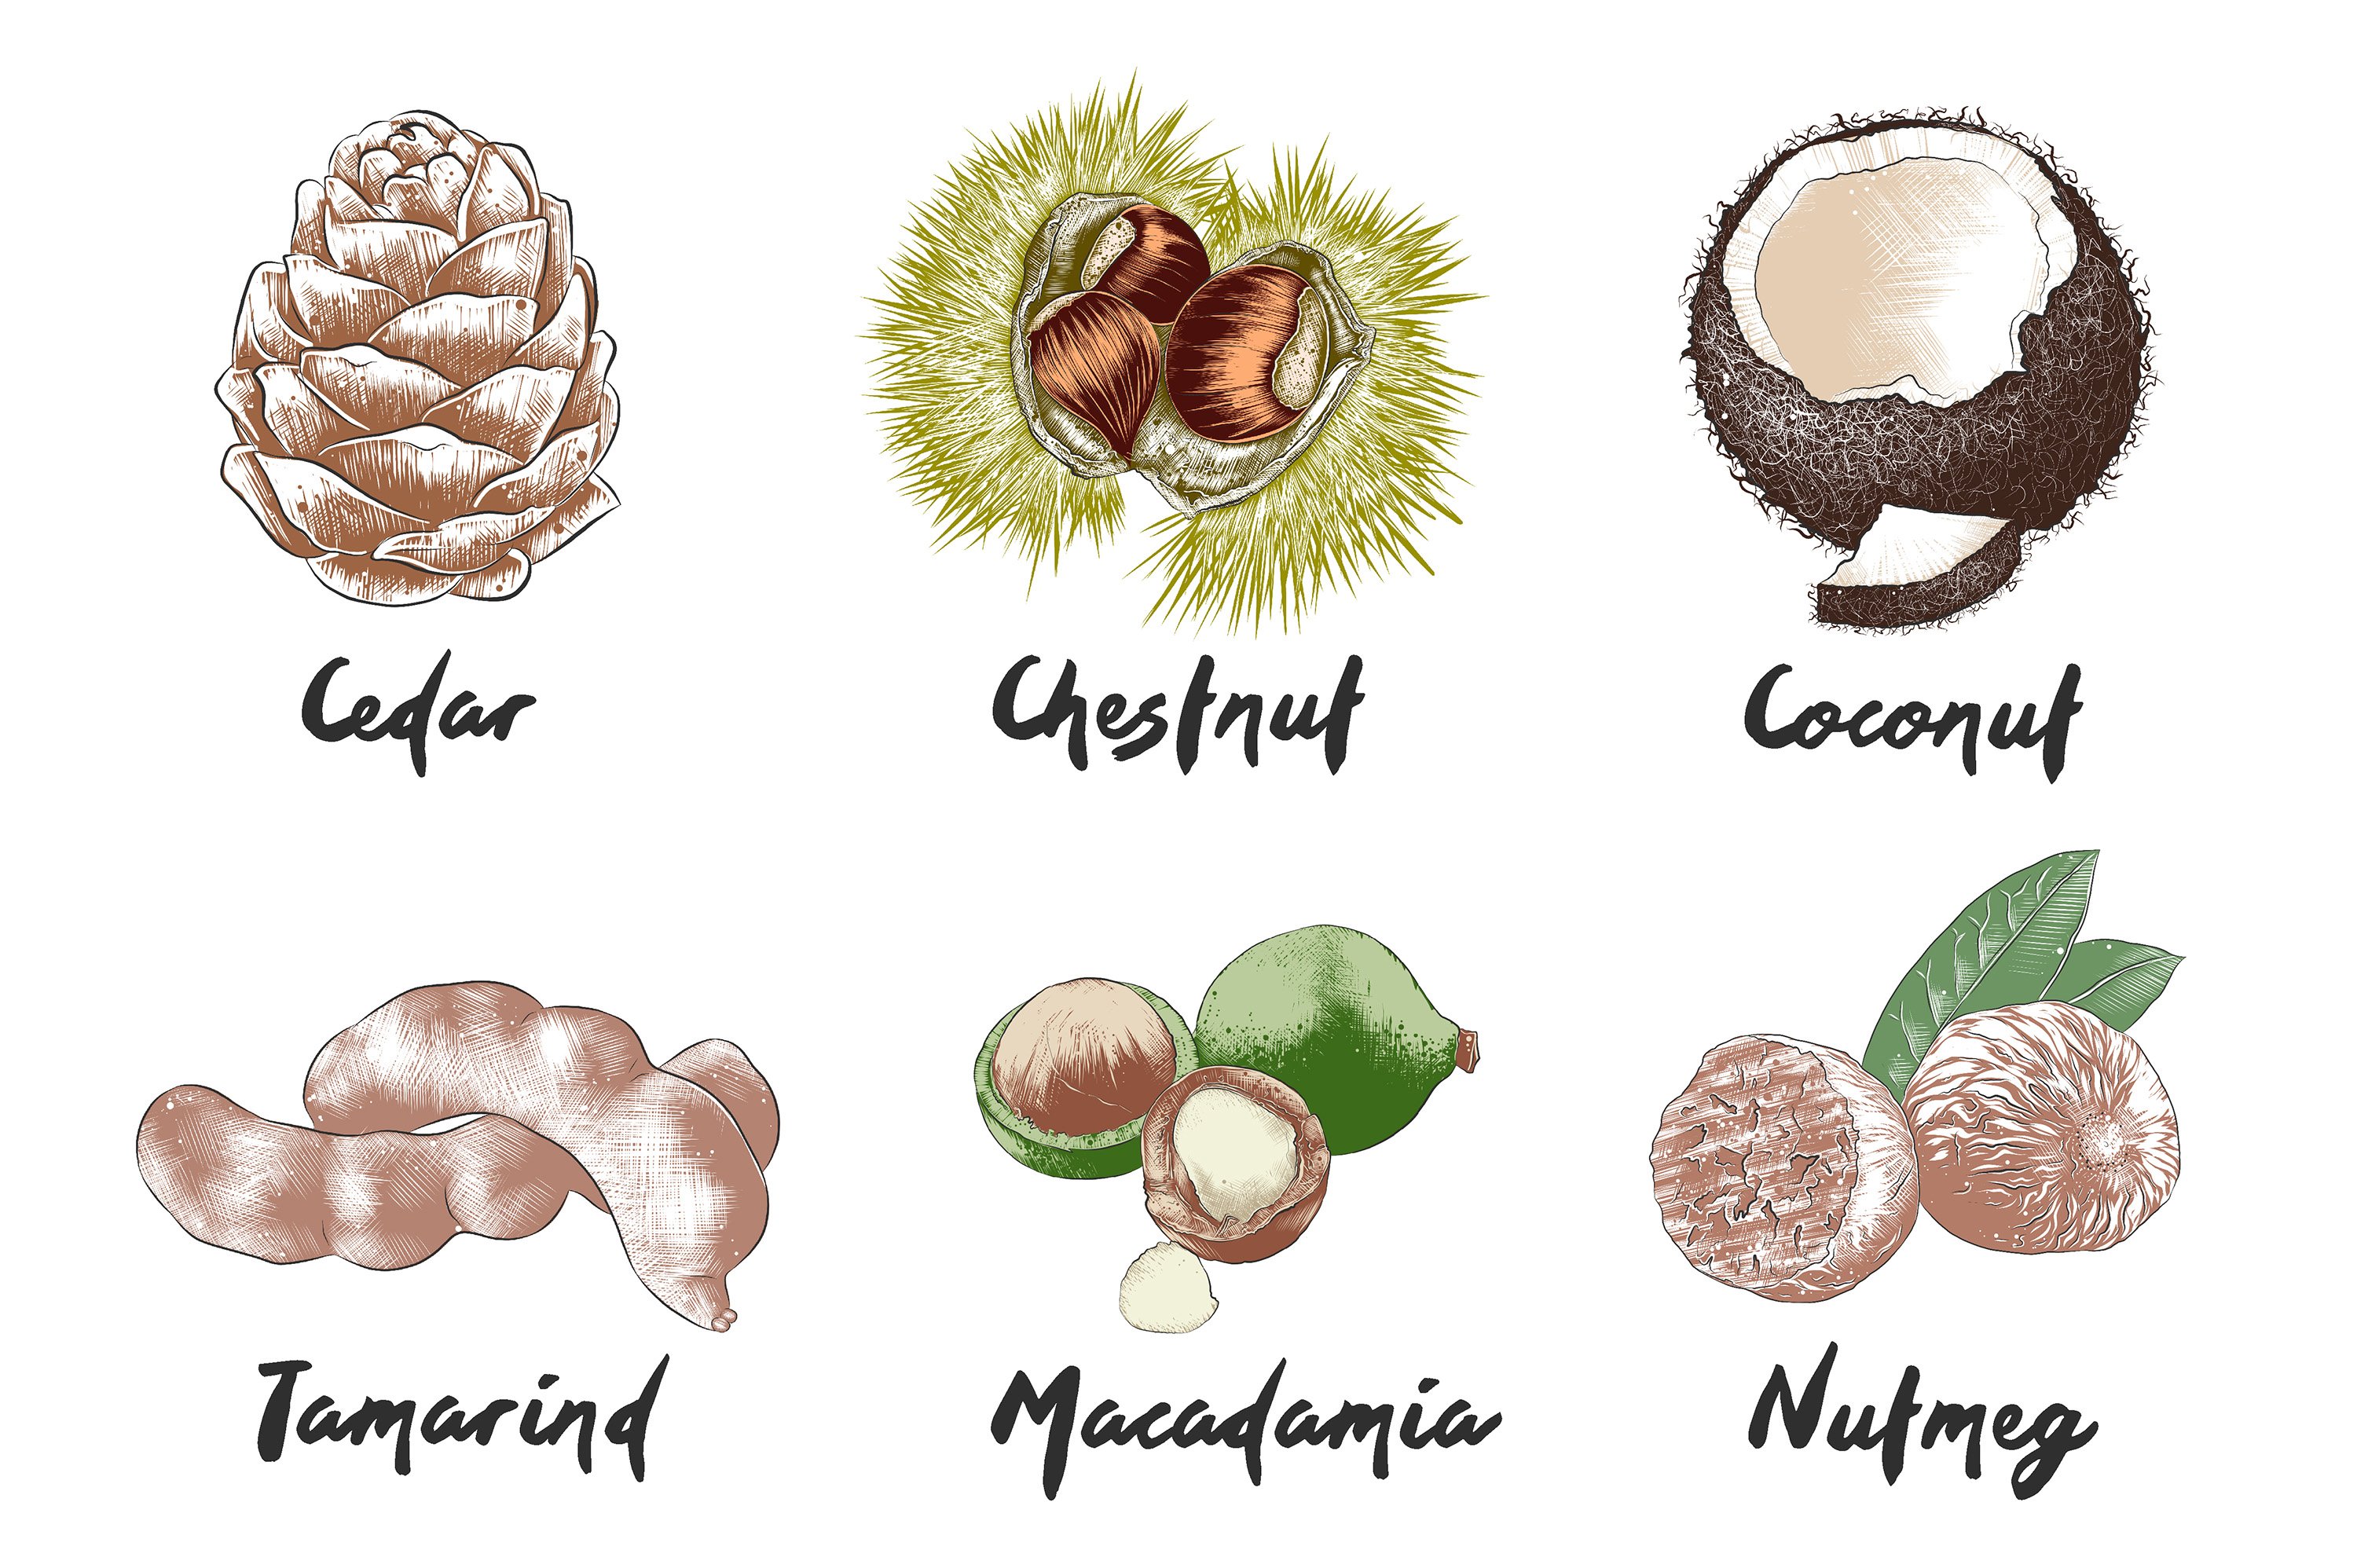 A bunch of different types of nuts.